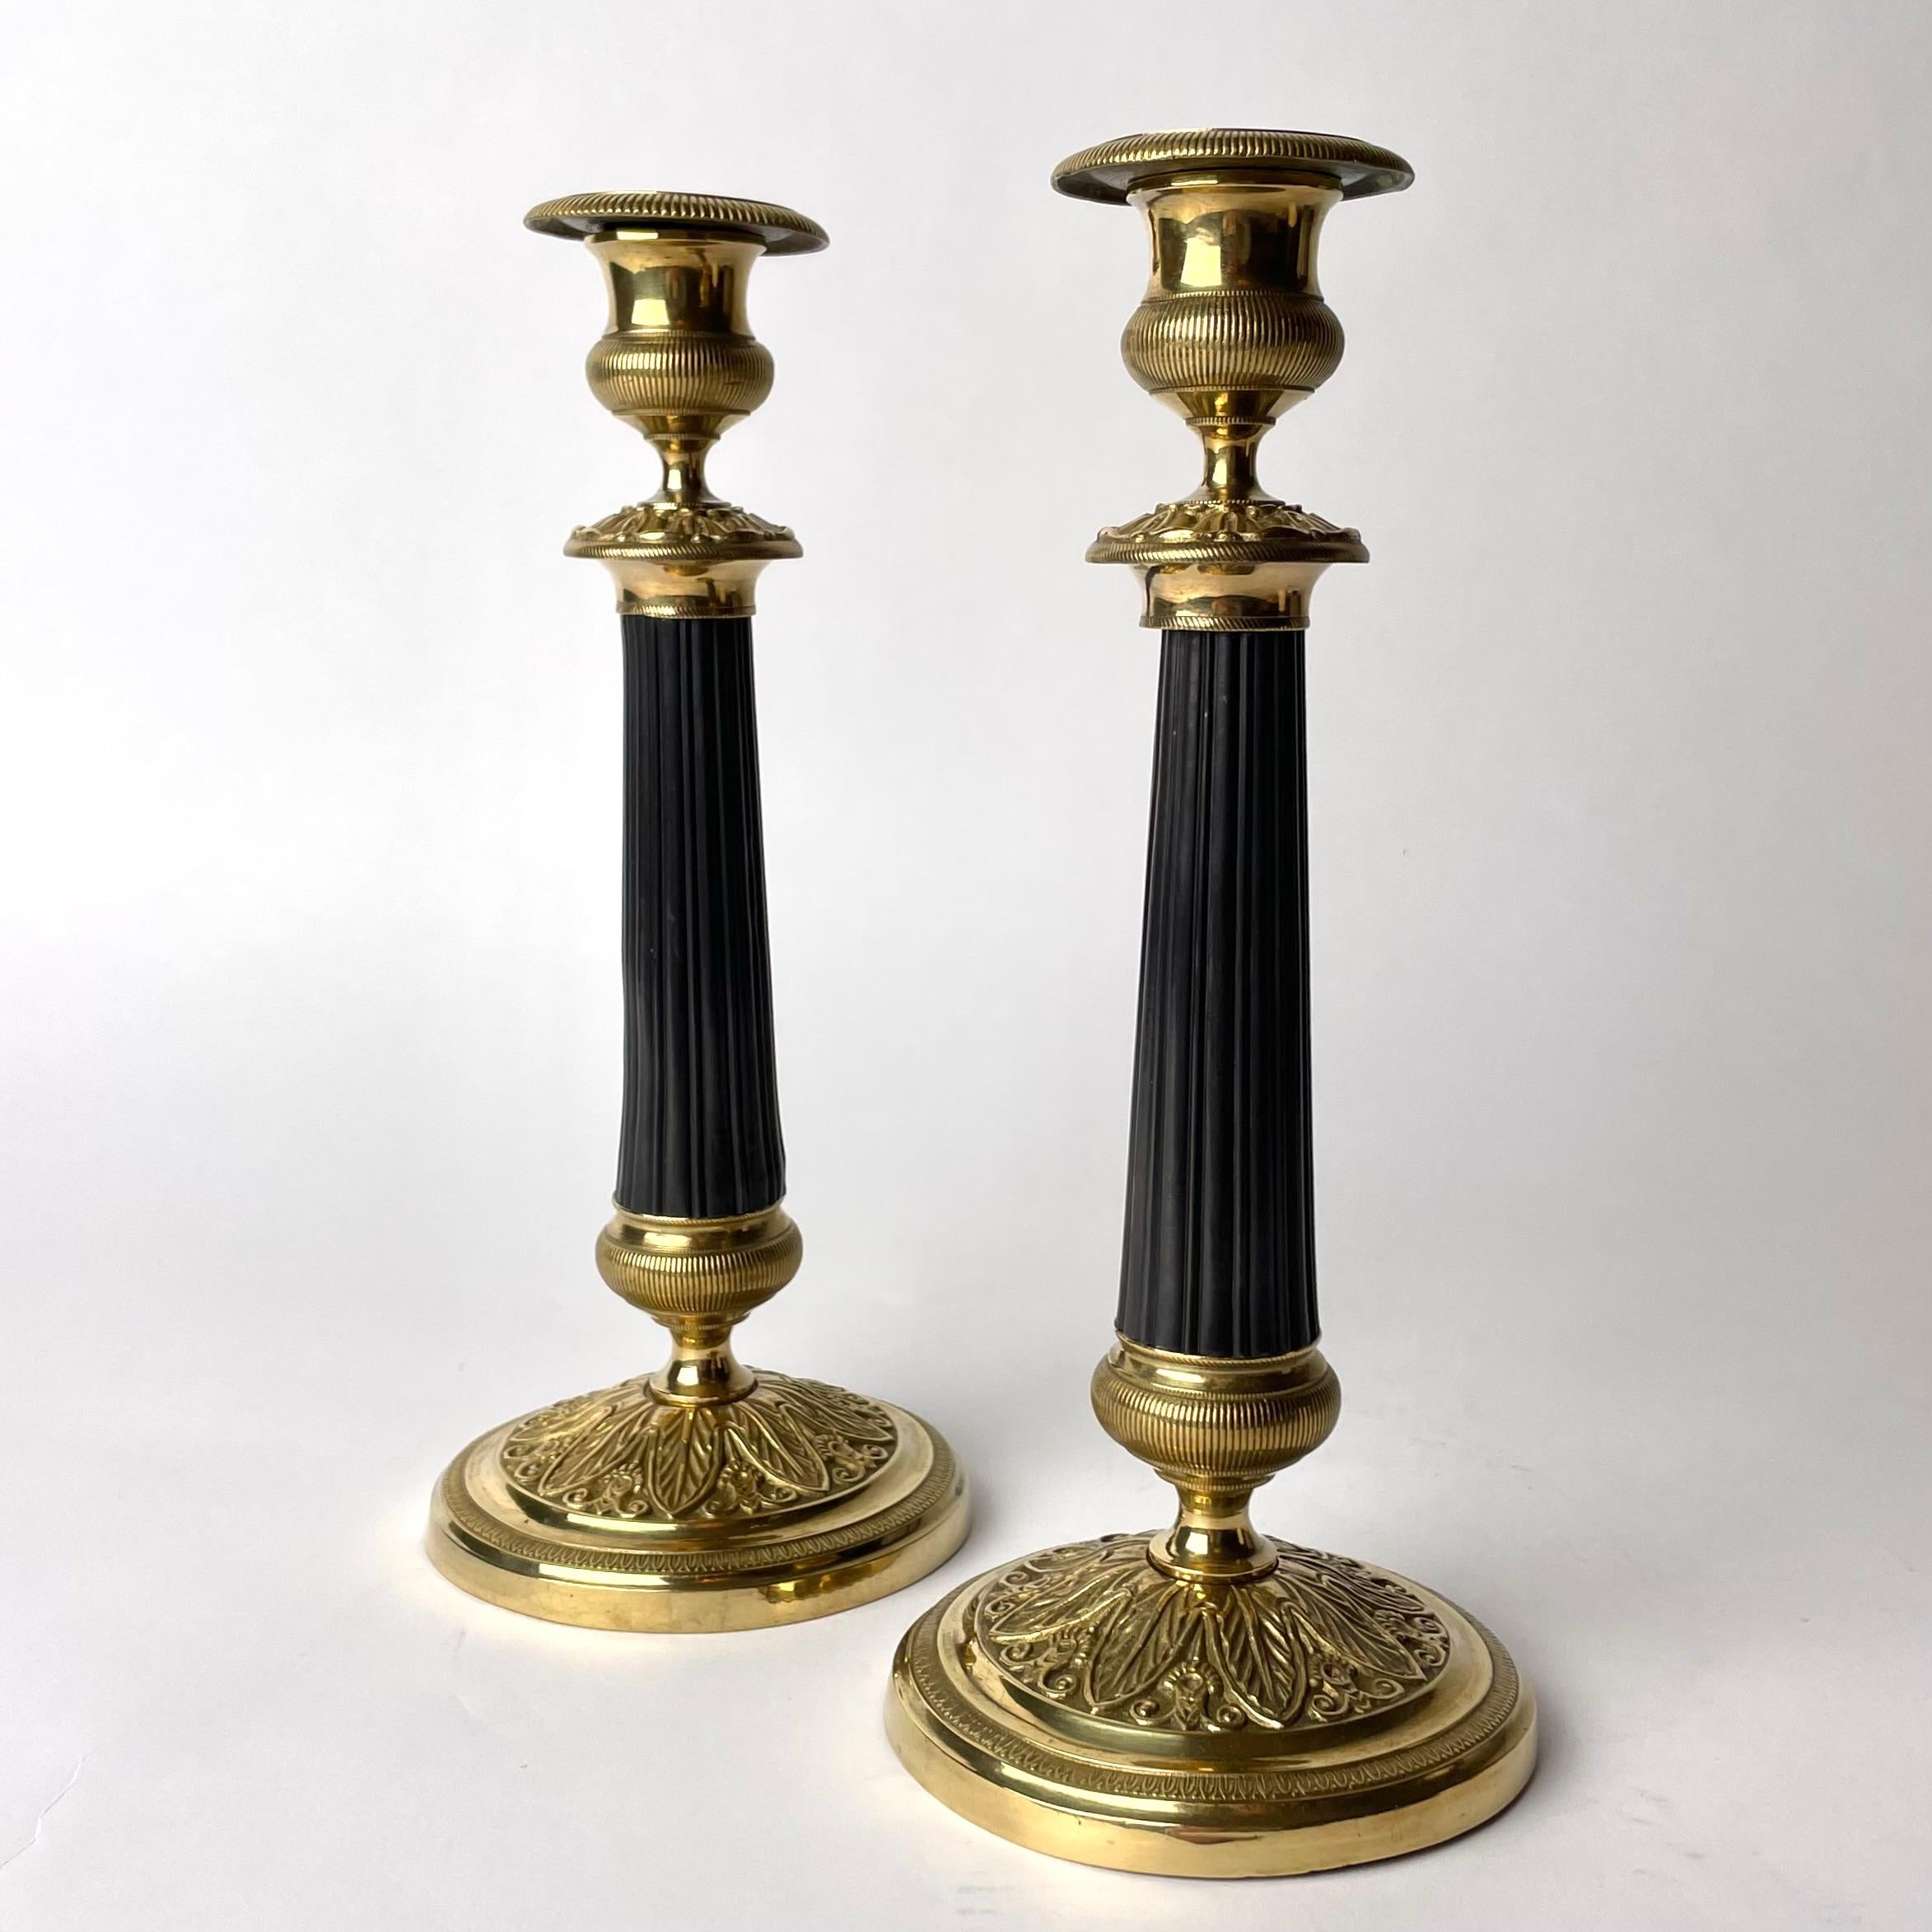 Elegant pair of Candlesticks in gilt & dark patinated bronze in Empire.  Made in France during the 1920s. Beautifully decorated with leaf ornaments and with a dark patinated column in the center of the candlesticks.

Wear consistent with age and use 